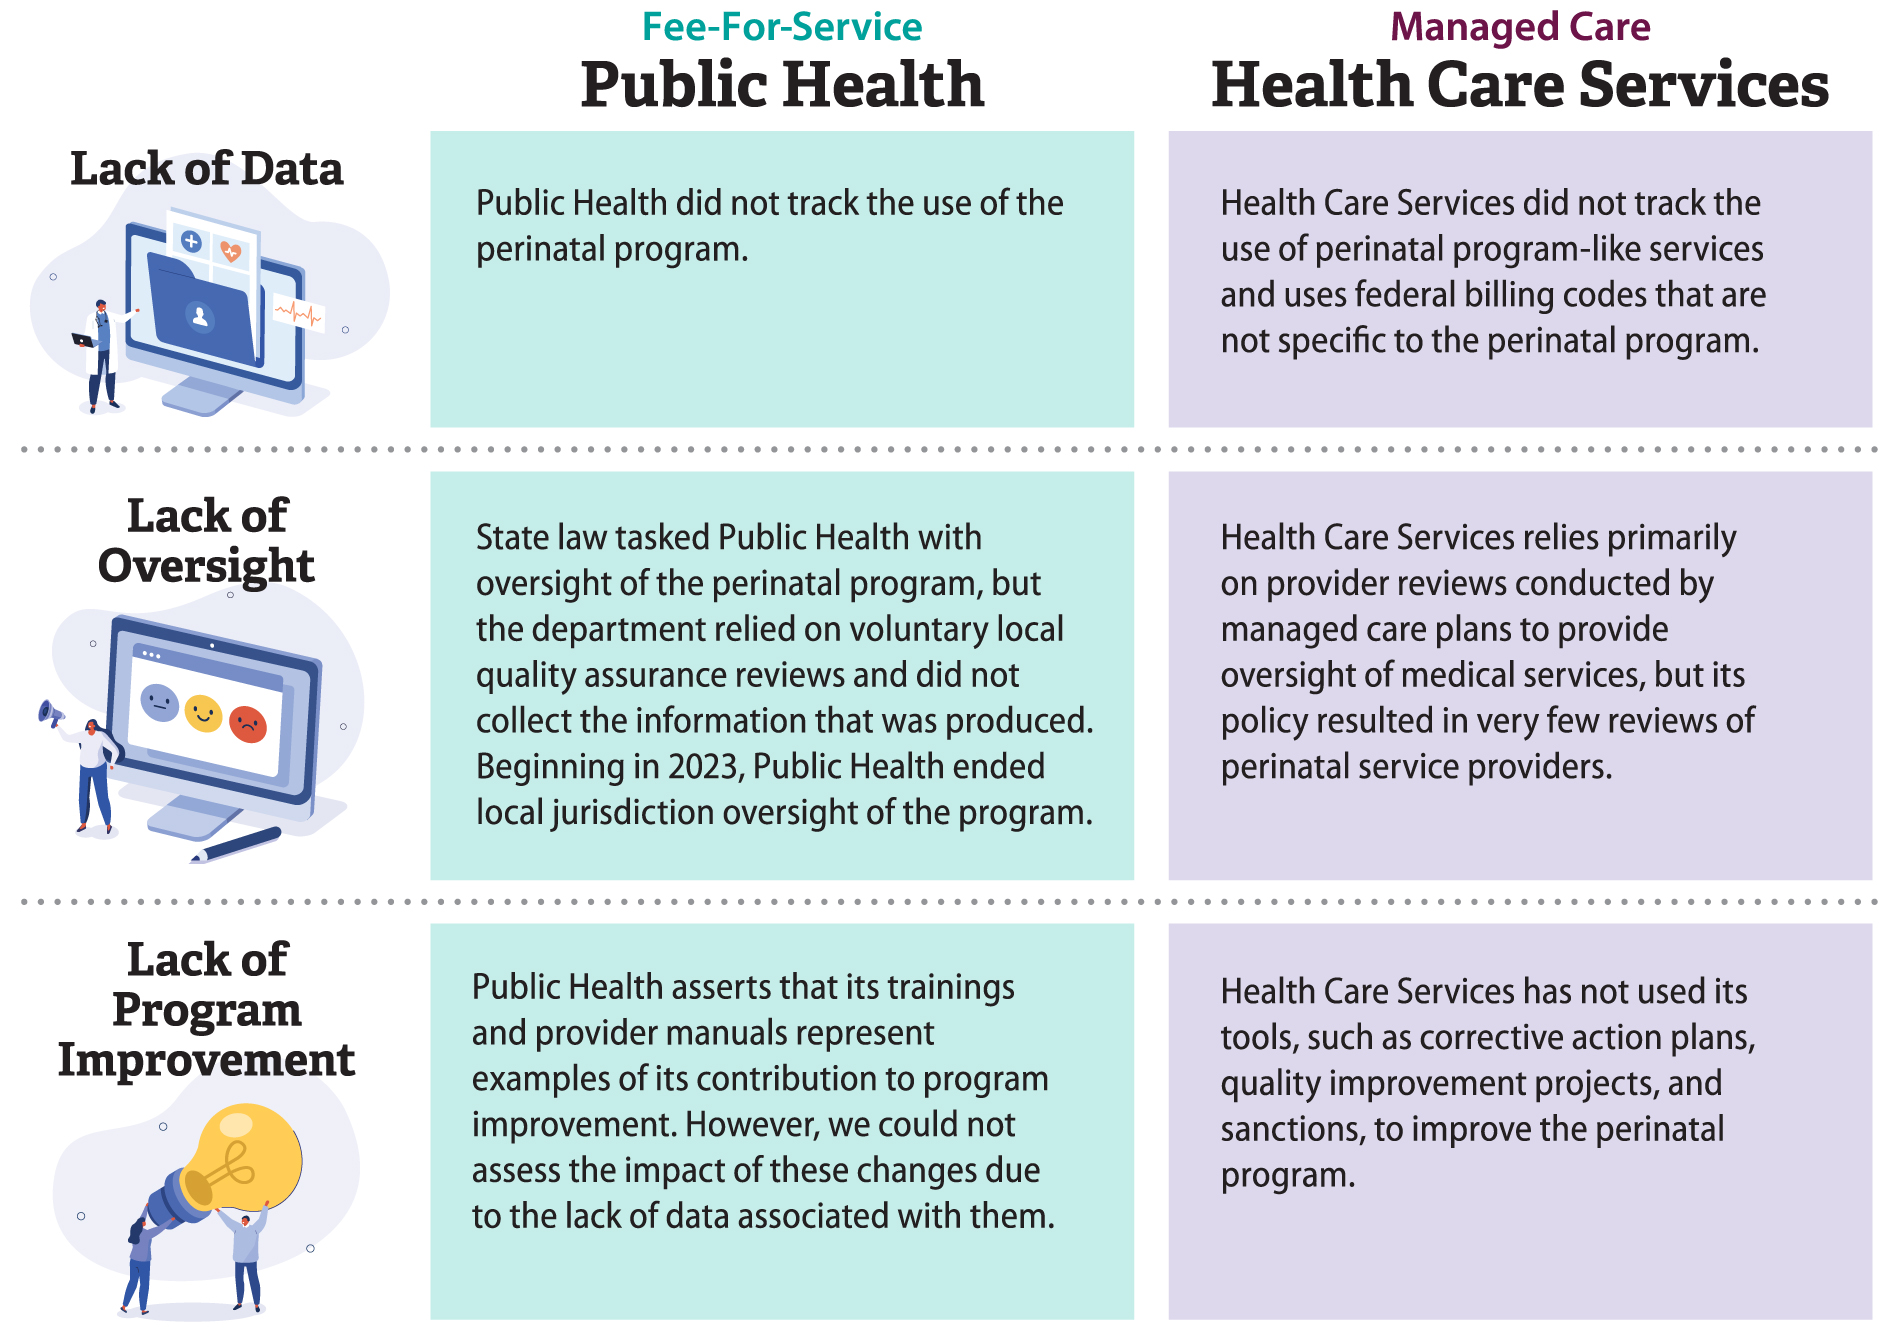 A chart comparing Public Health’s and Health Care Services’ lack of data, lack of oversight, and lack of program improvement for the perinatal program